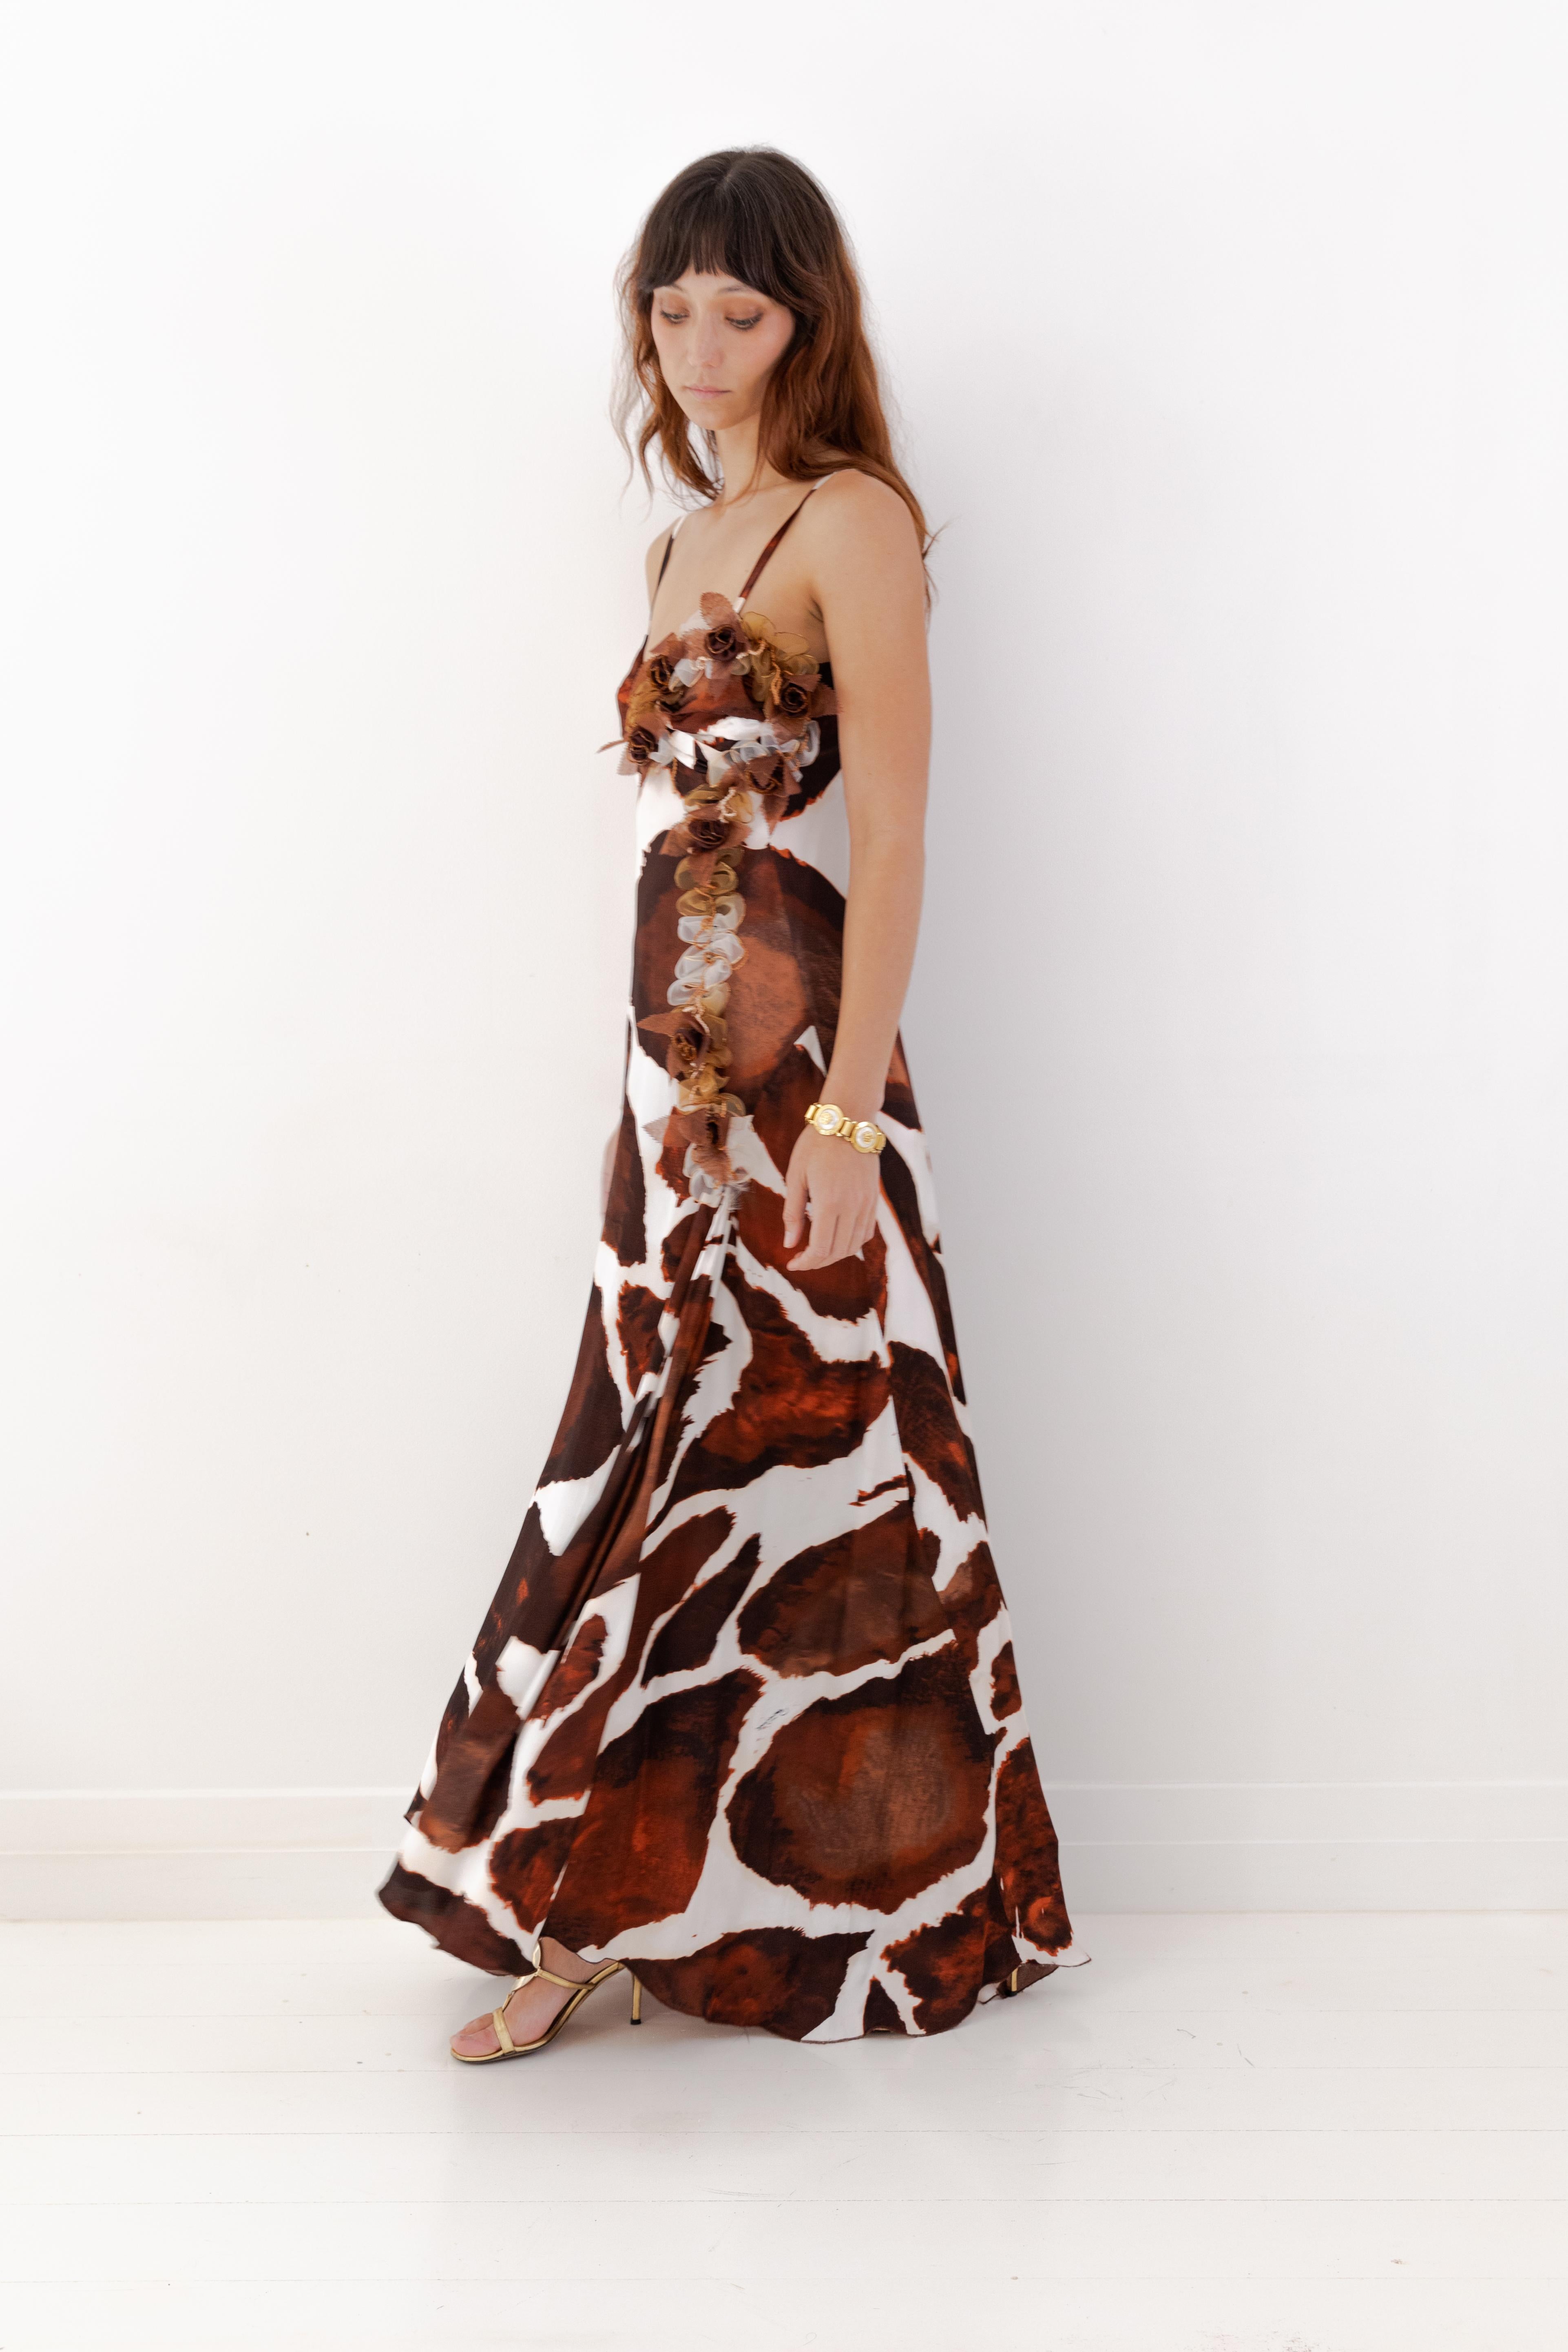 Roberto Cavalli S/S 2006 Giraffe Print Silk Gown with 3D Floral Appliqués For Sale 3